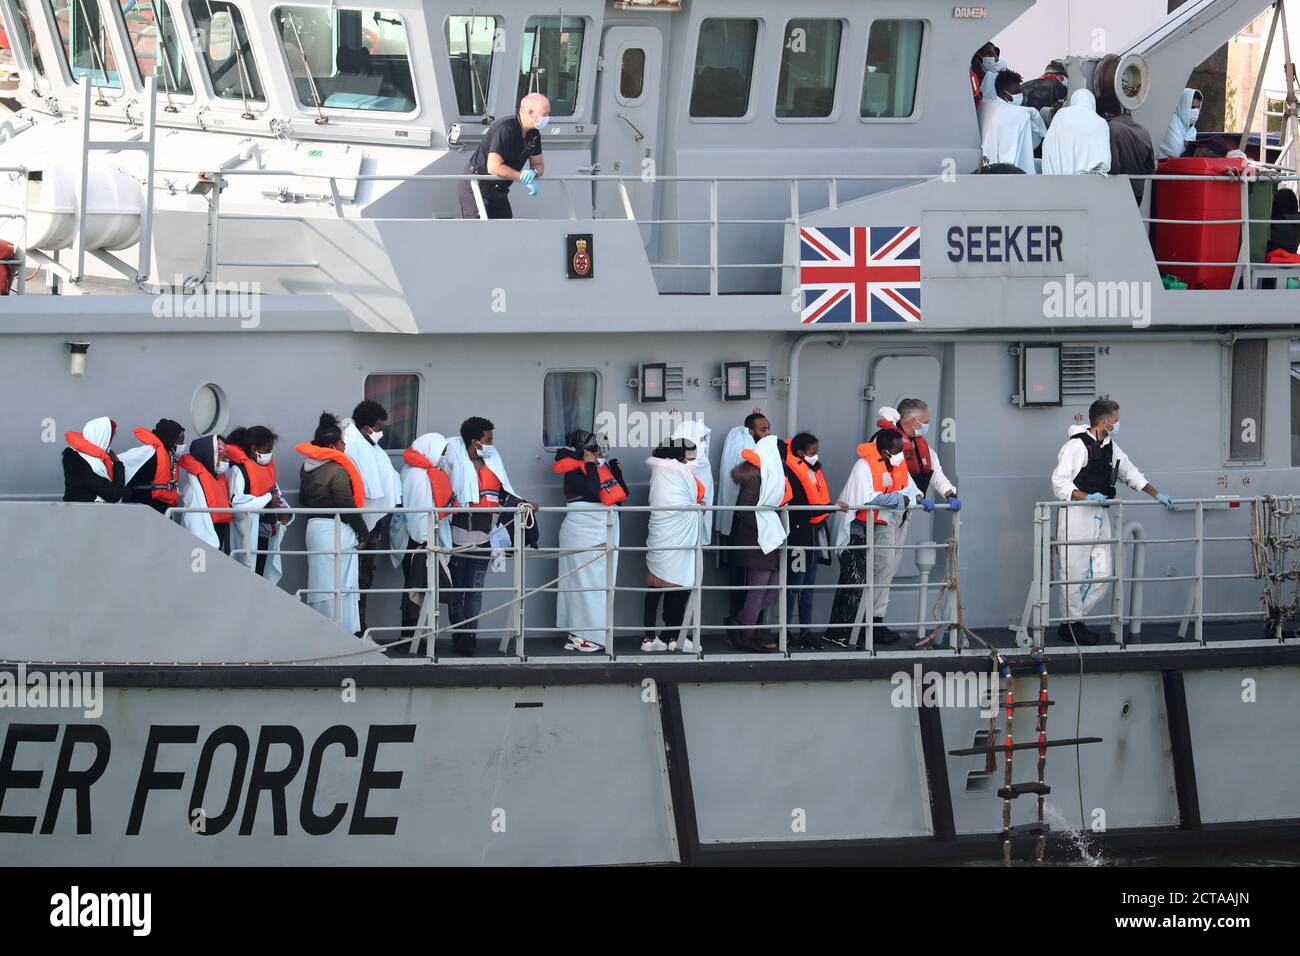 A group of people, thought to be migrants, on the deck of HMC Seeker, as they queue to disembark at Dover marina in Kent, after a small boat incident in the English Channel. Stock Photo